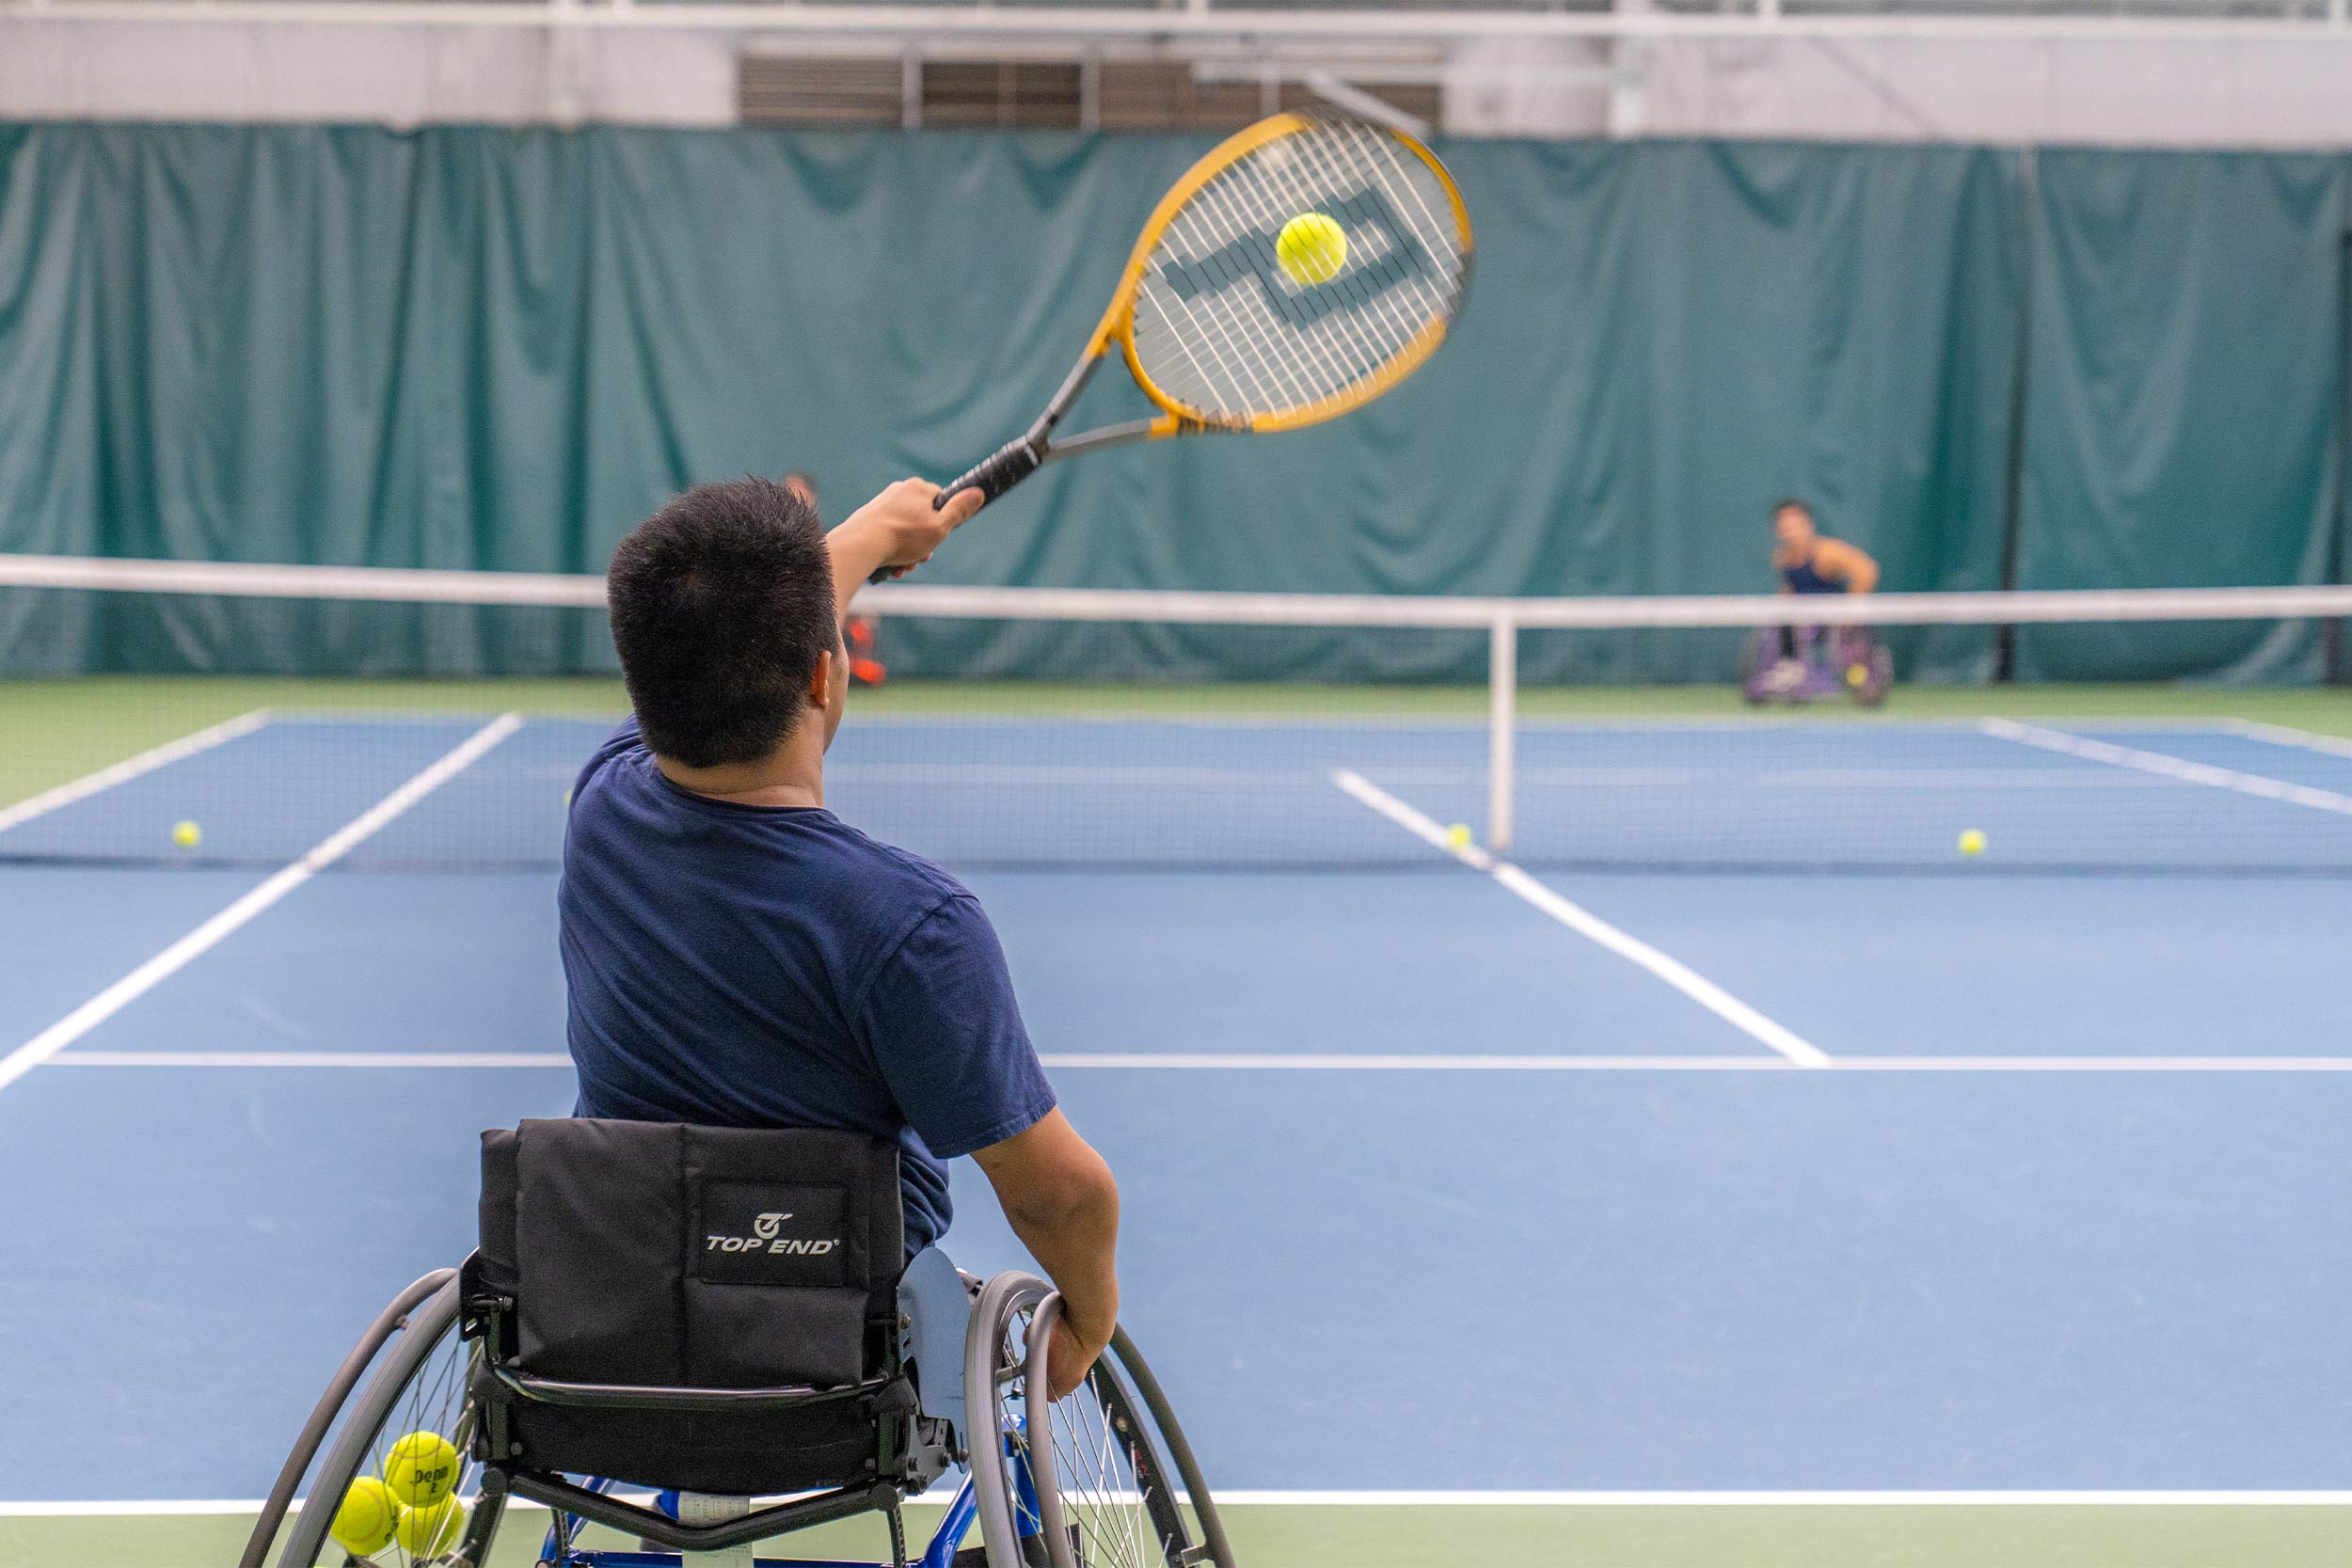 Man in wheelchair hits tennis ball during a match. In background is the other participant in the match. 